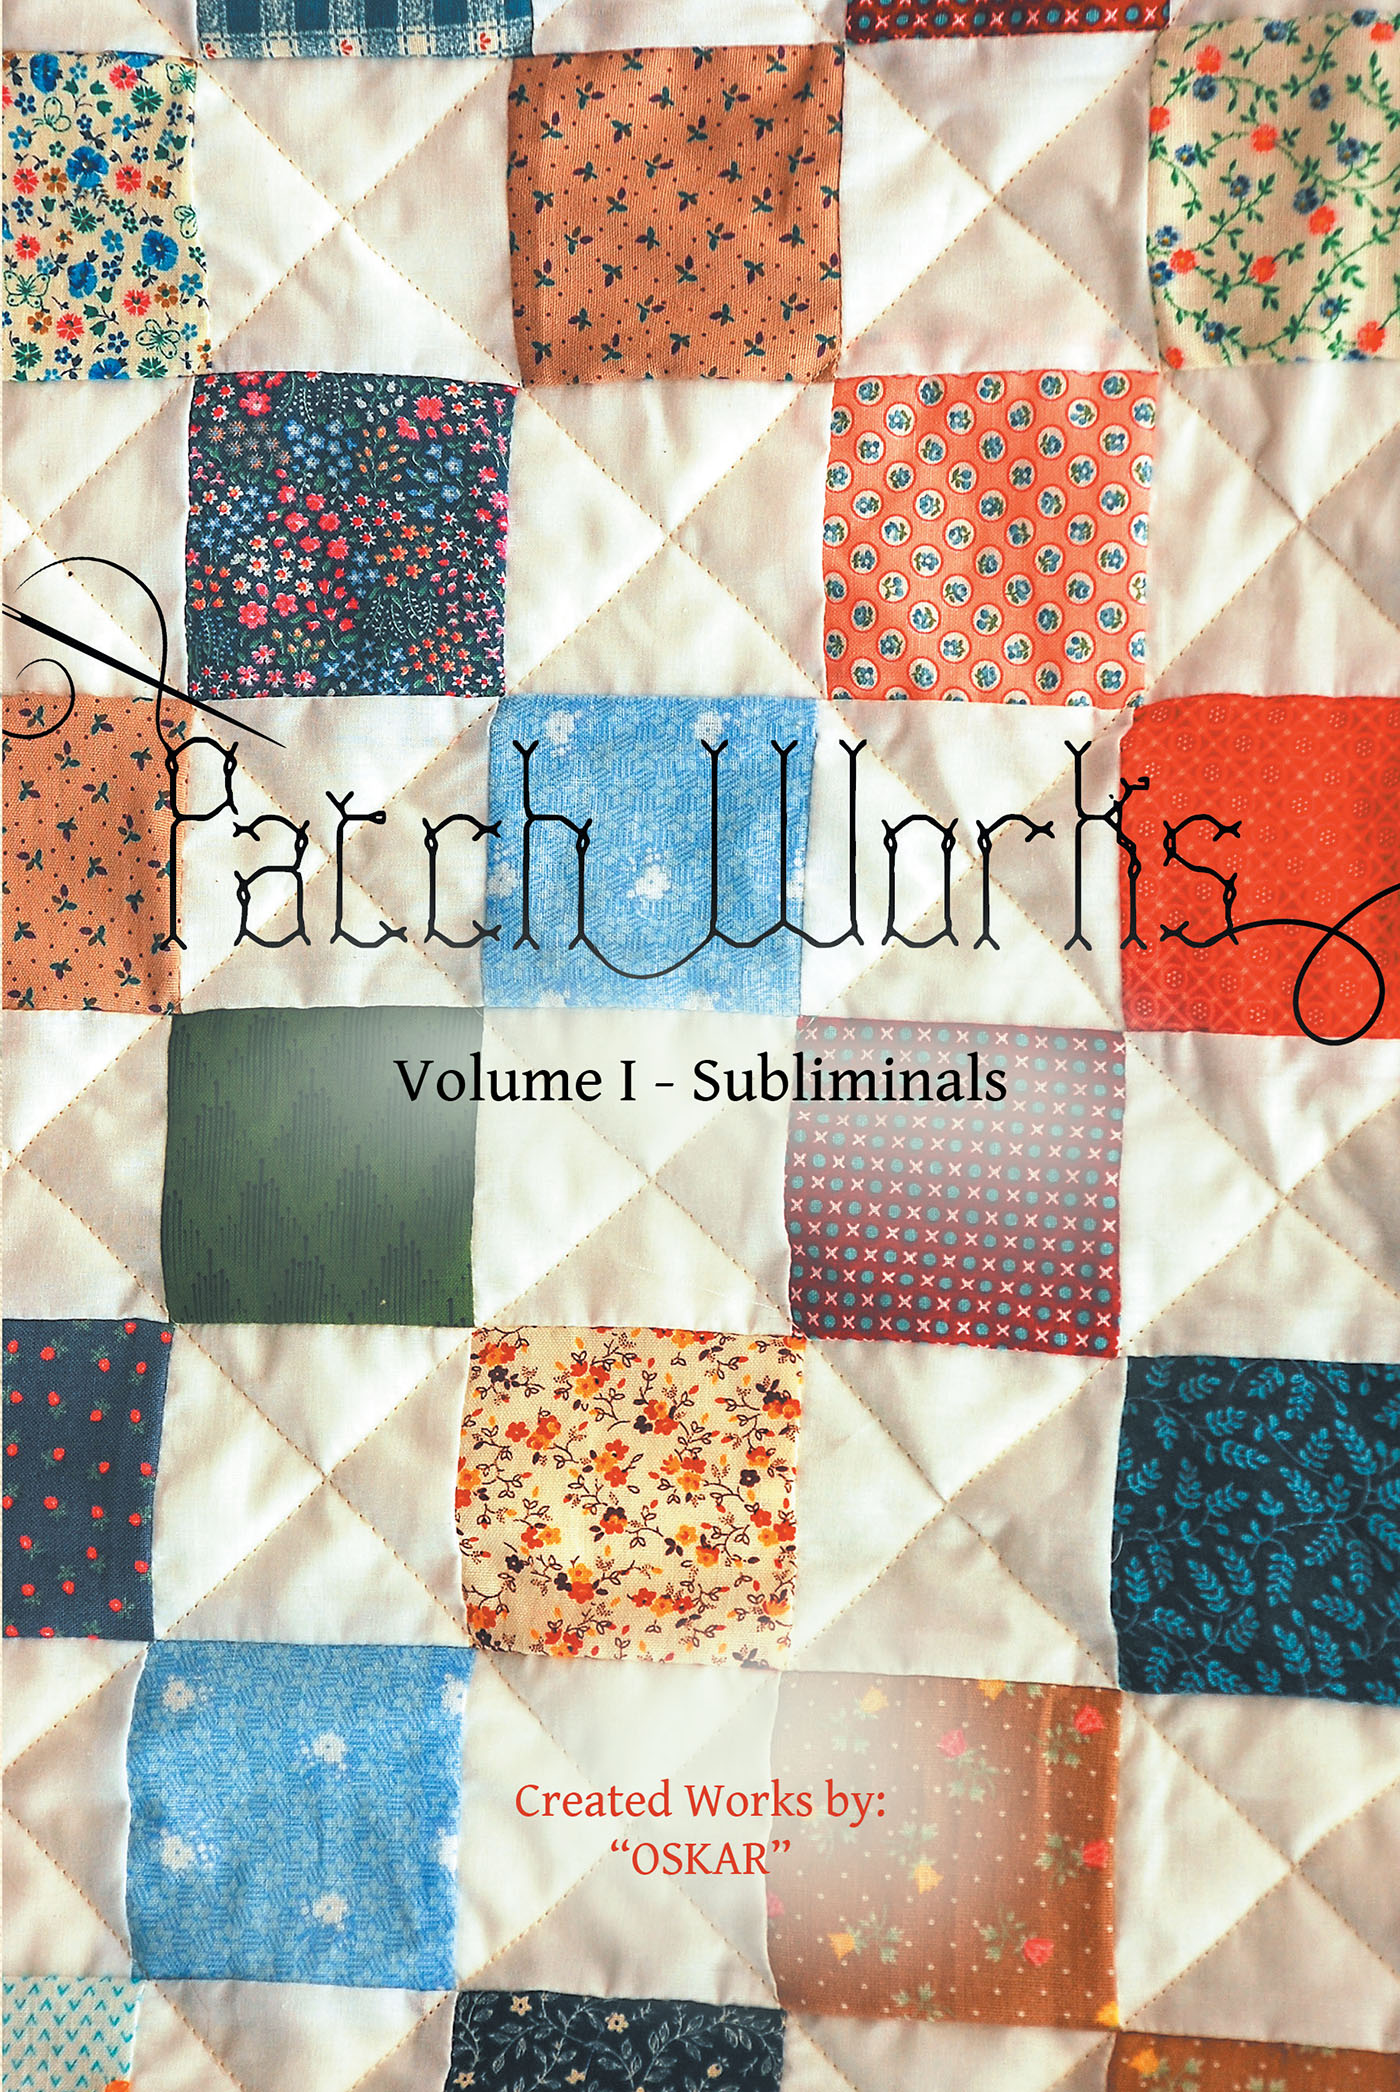 Author OsKar’s New Book, "Patch Works: Volume I - Subliminals," is a Compelling Collection of Moving Poetry Covering a Wide Variety of Topics and Themes